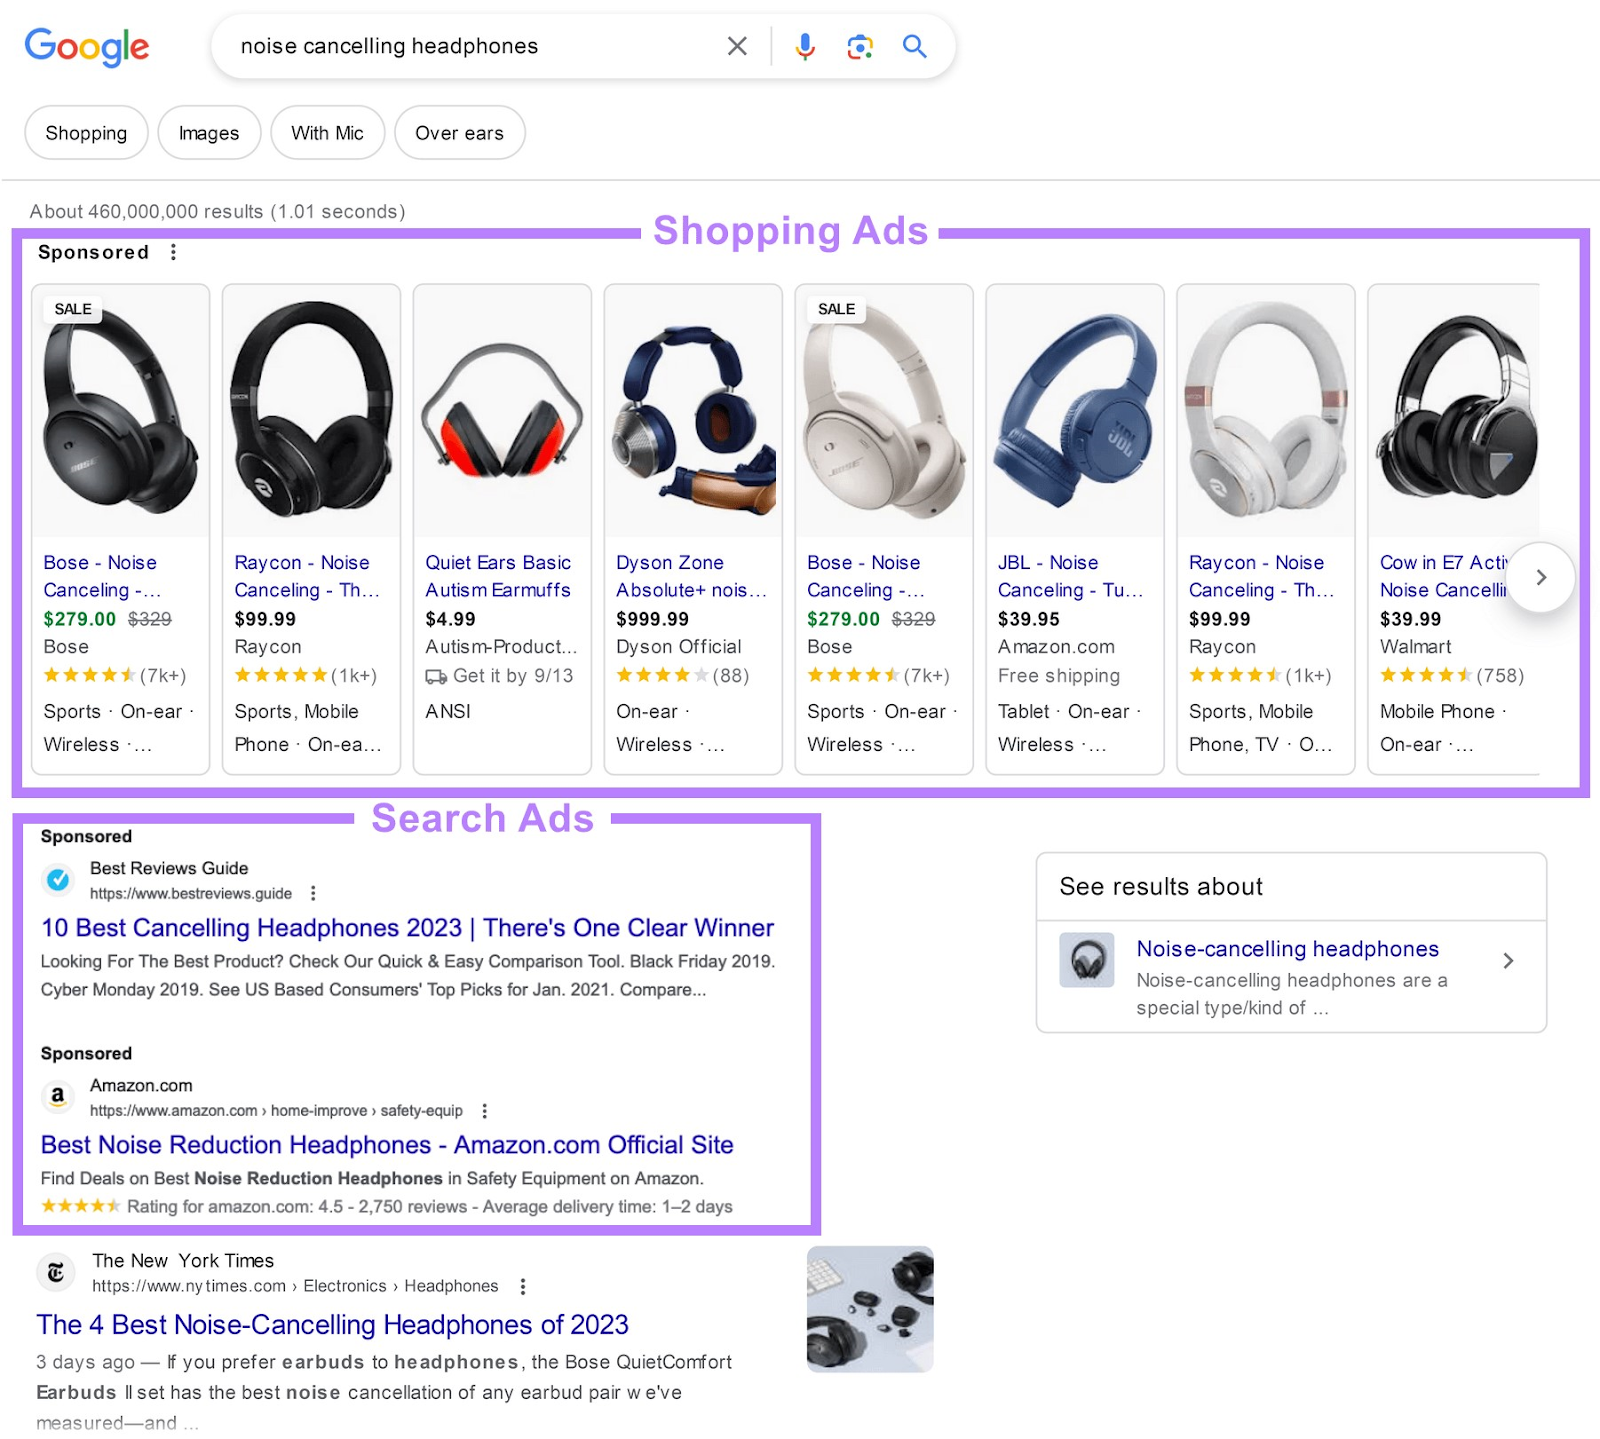 Shopping and Search ads highlighted in Google SERP for "noise cancelling headphones" query